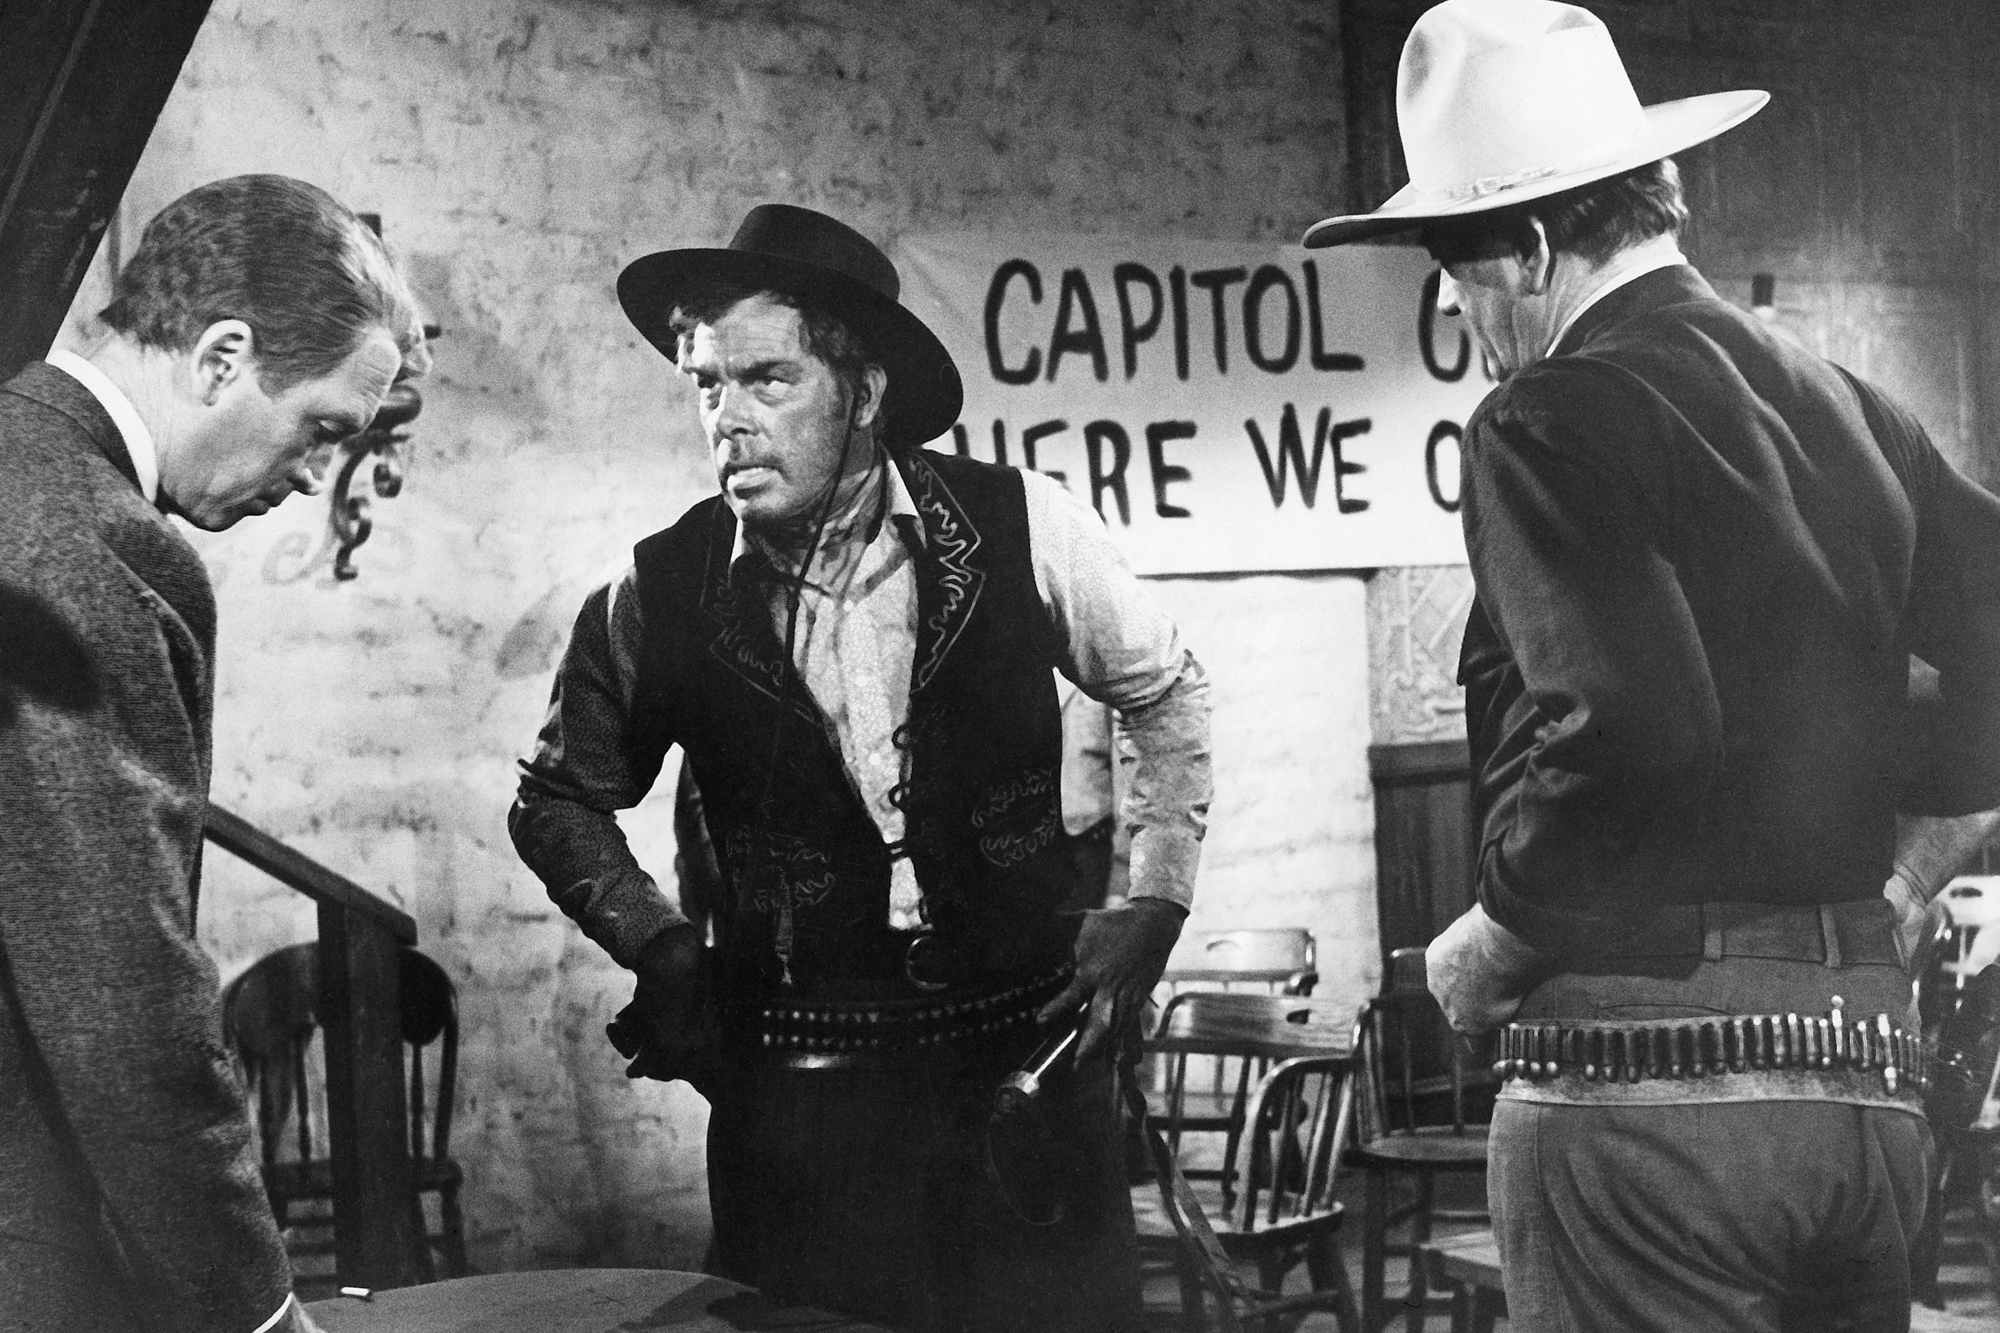 'The Man Who Shot Liberty Valance' James Stewart as Ransom Stoddard, Lee Marvin as Liberty Valance, and John Wayne as Tom Doniphon standing in front of a sign amongst tables. They're all wearing Western costumes.